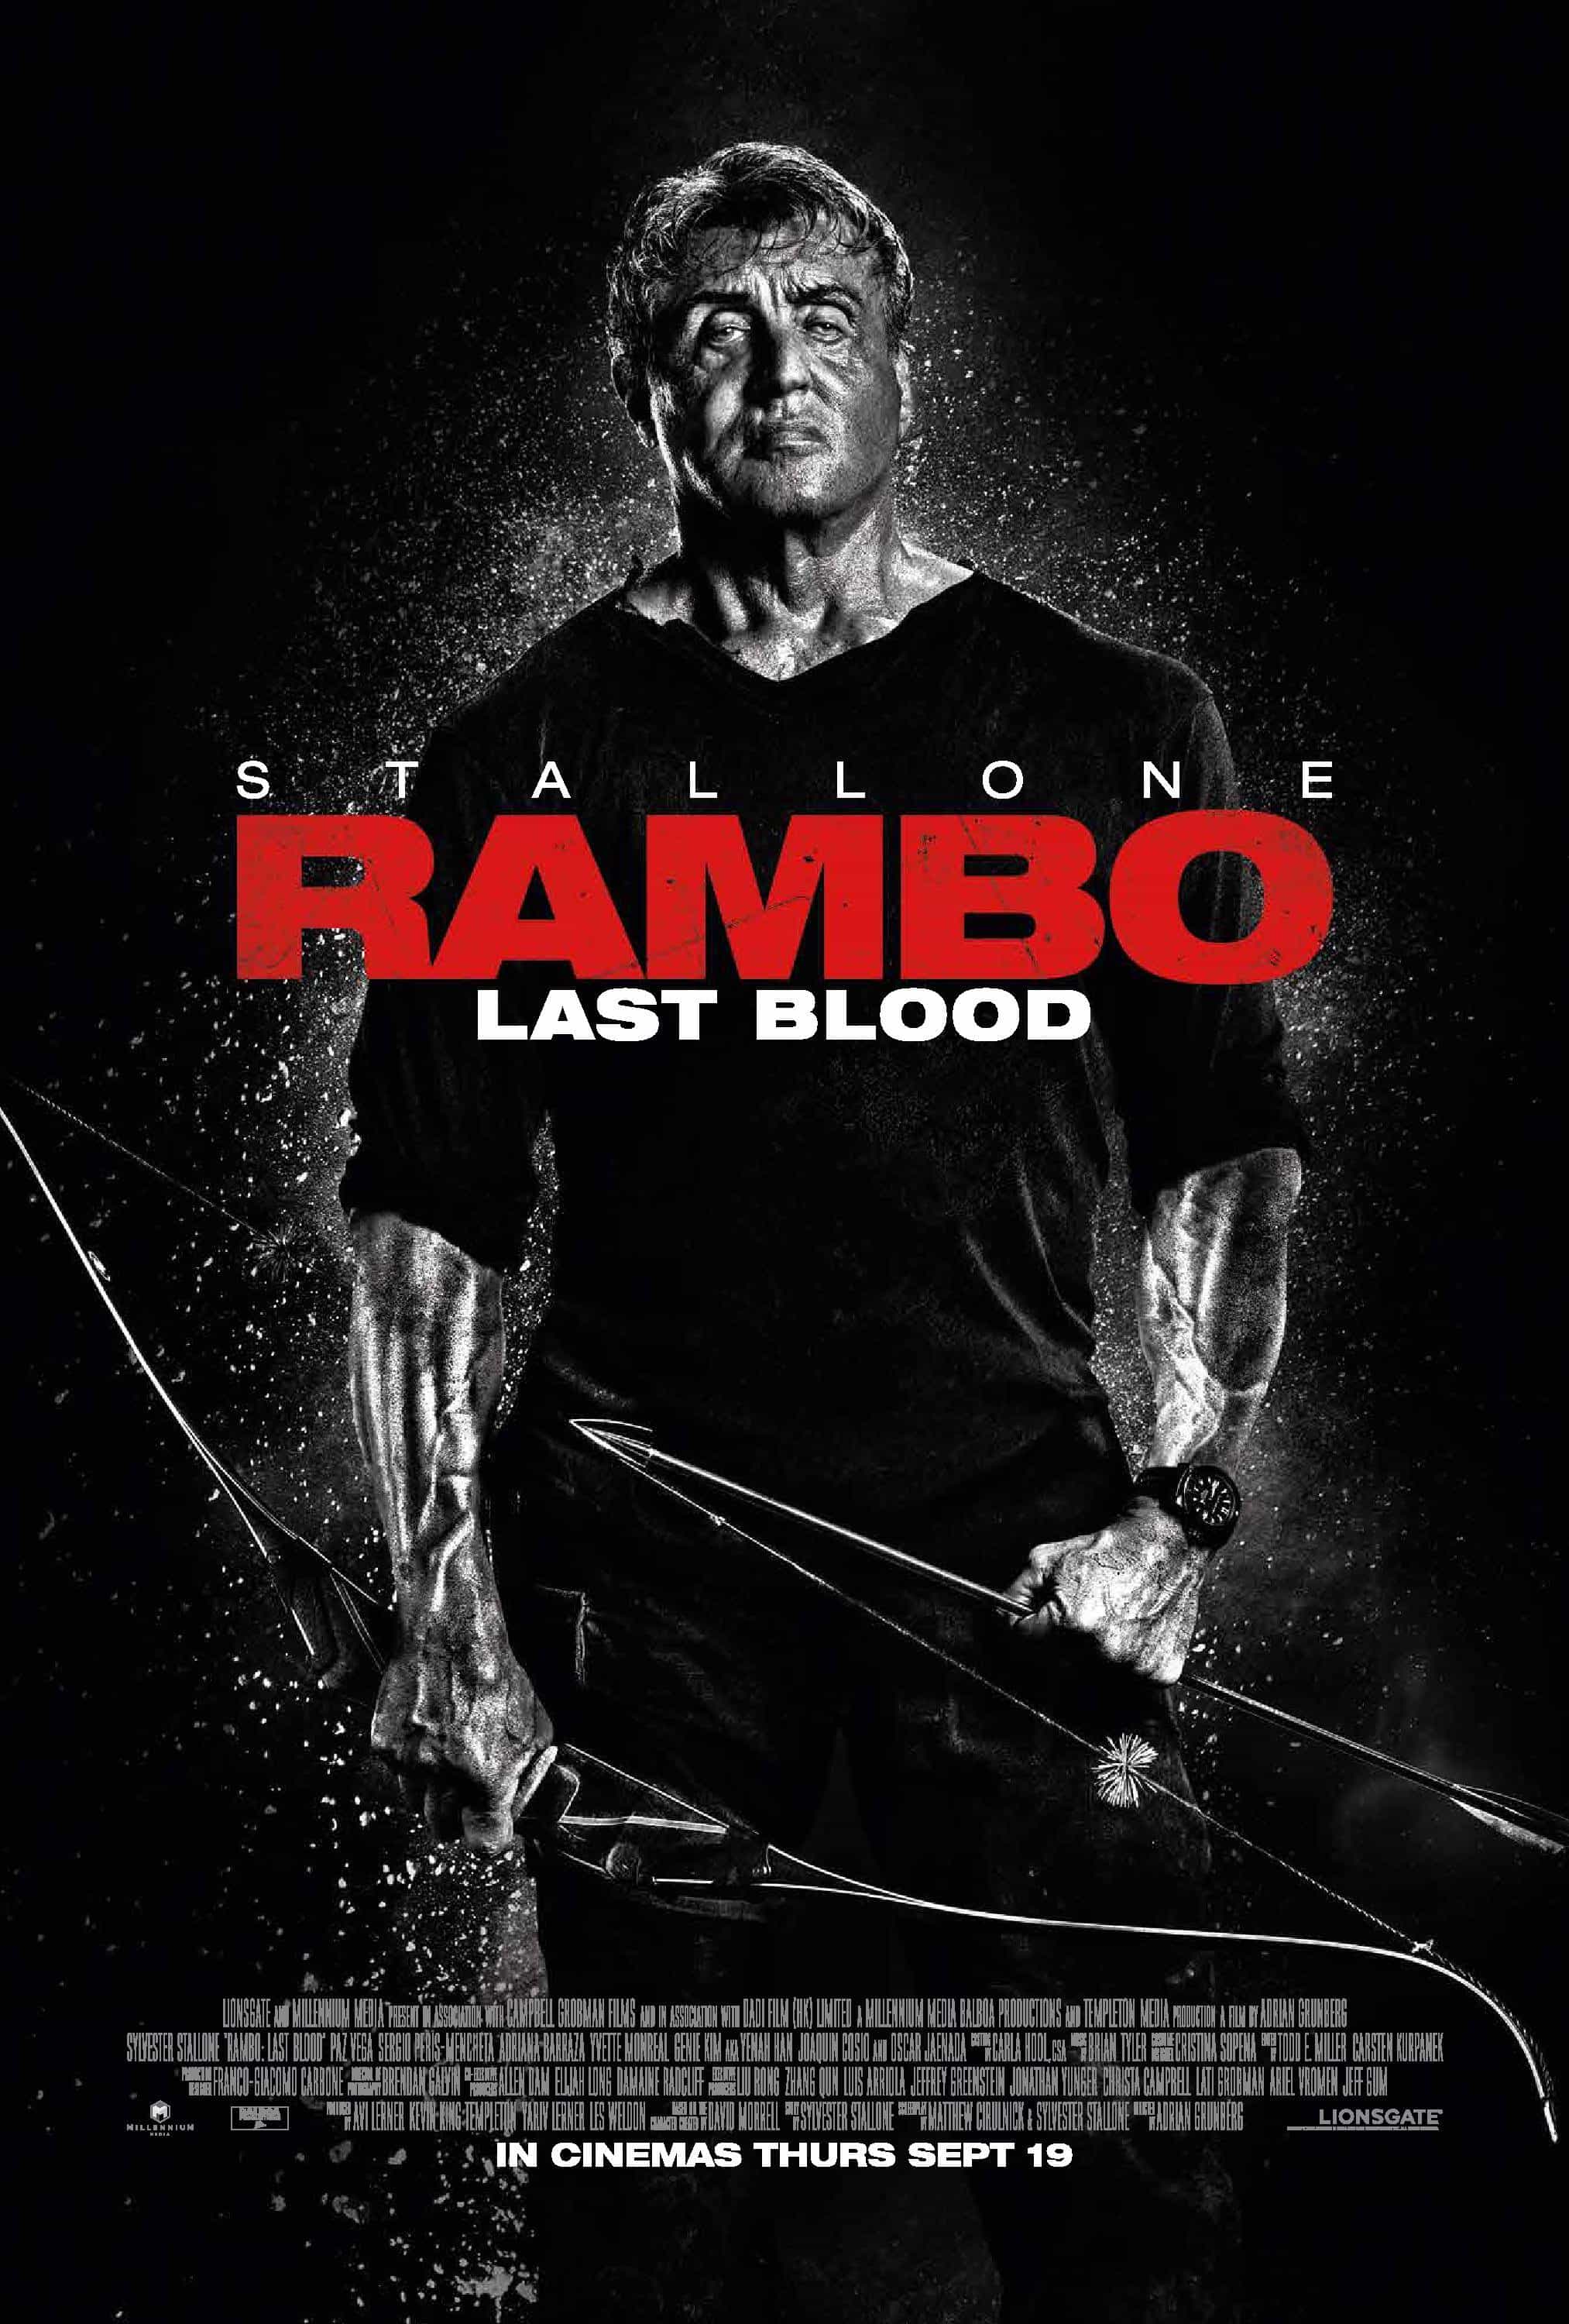 Sylvester Stallone starring Rambo: Last Blood gets its first trailer and poster